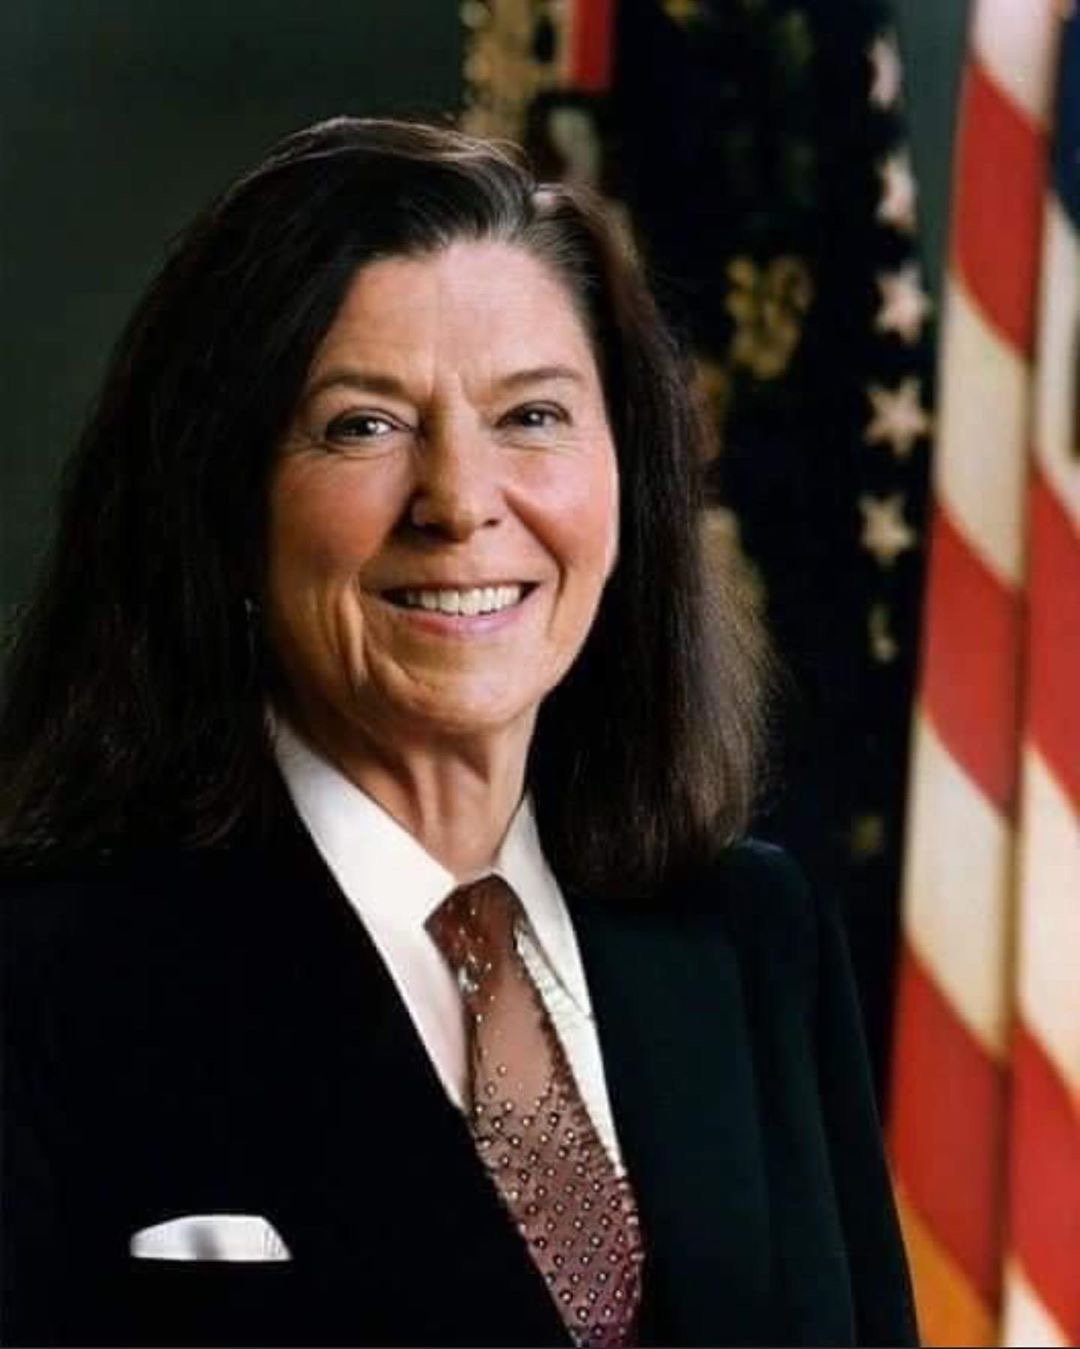 If Ronald Reagan was a woman President